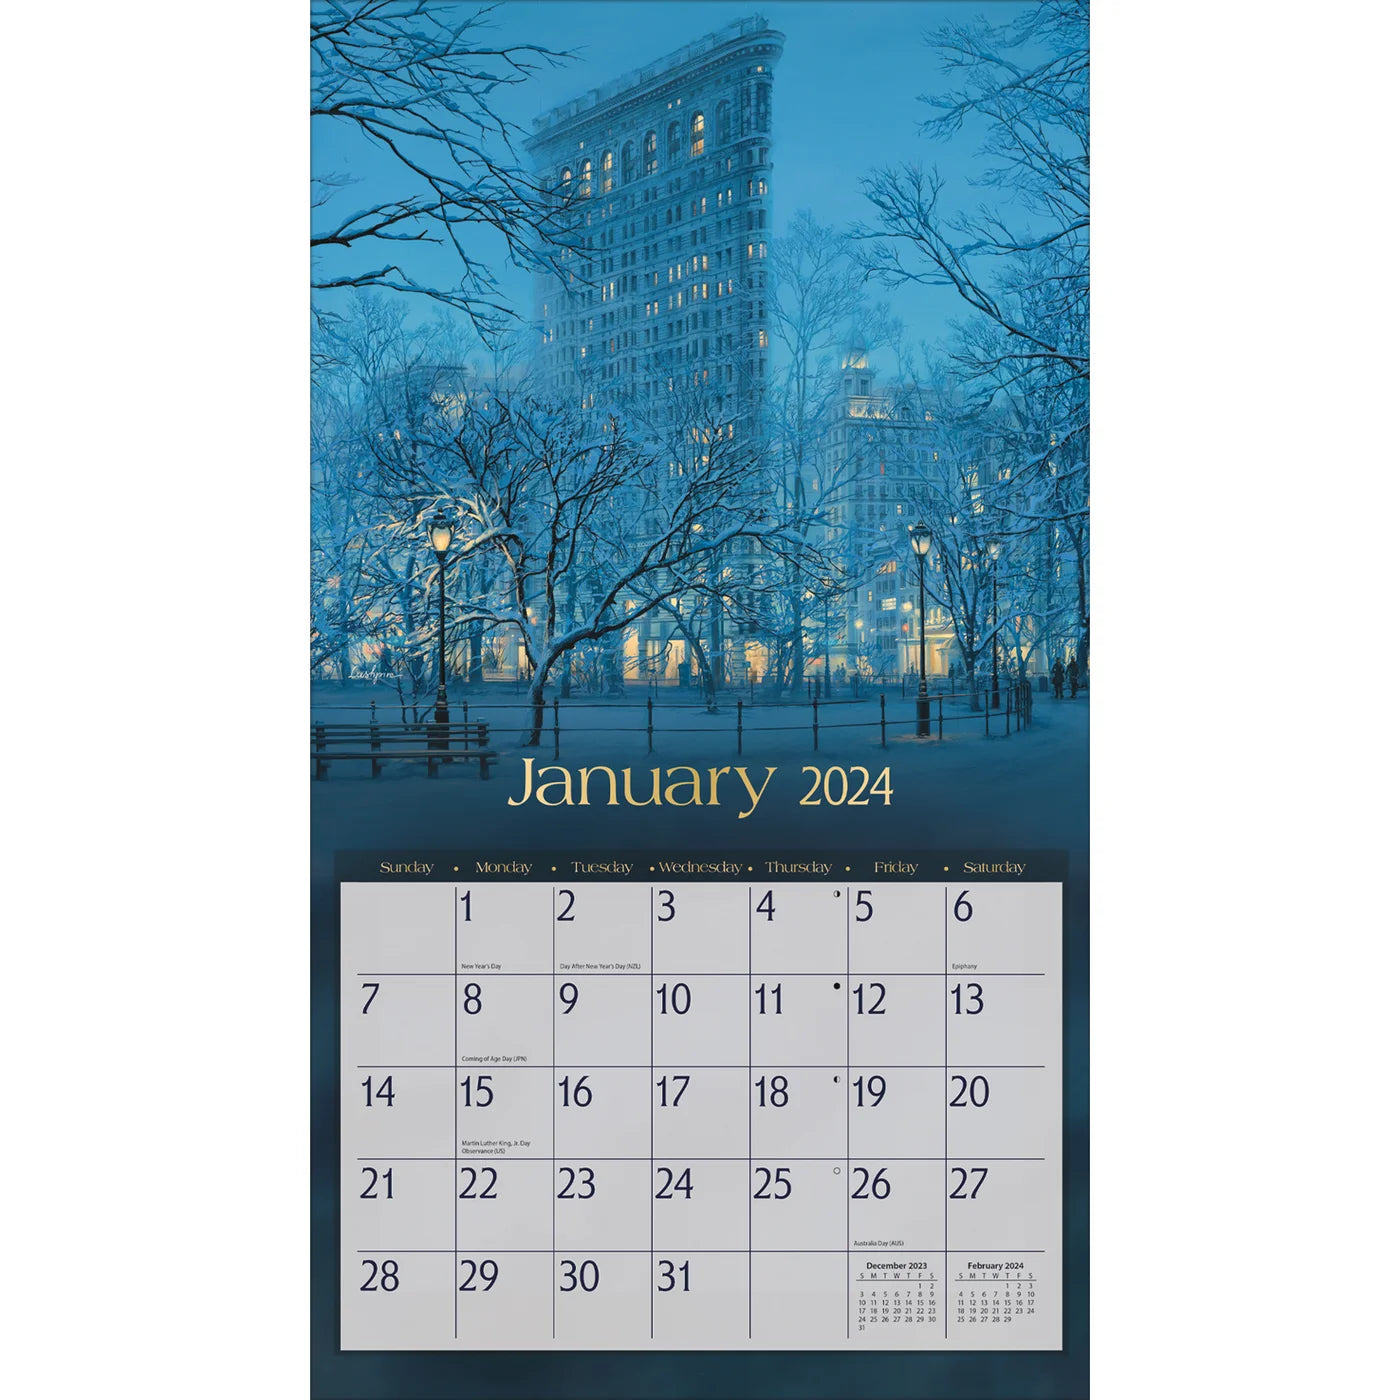 2024 LANG Around The World By Evgeny Lushpin - Deluxe Wall Calendar